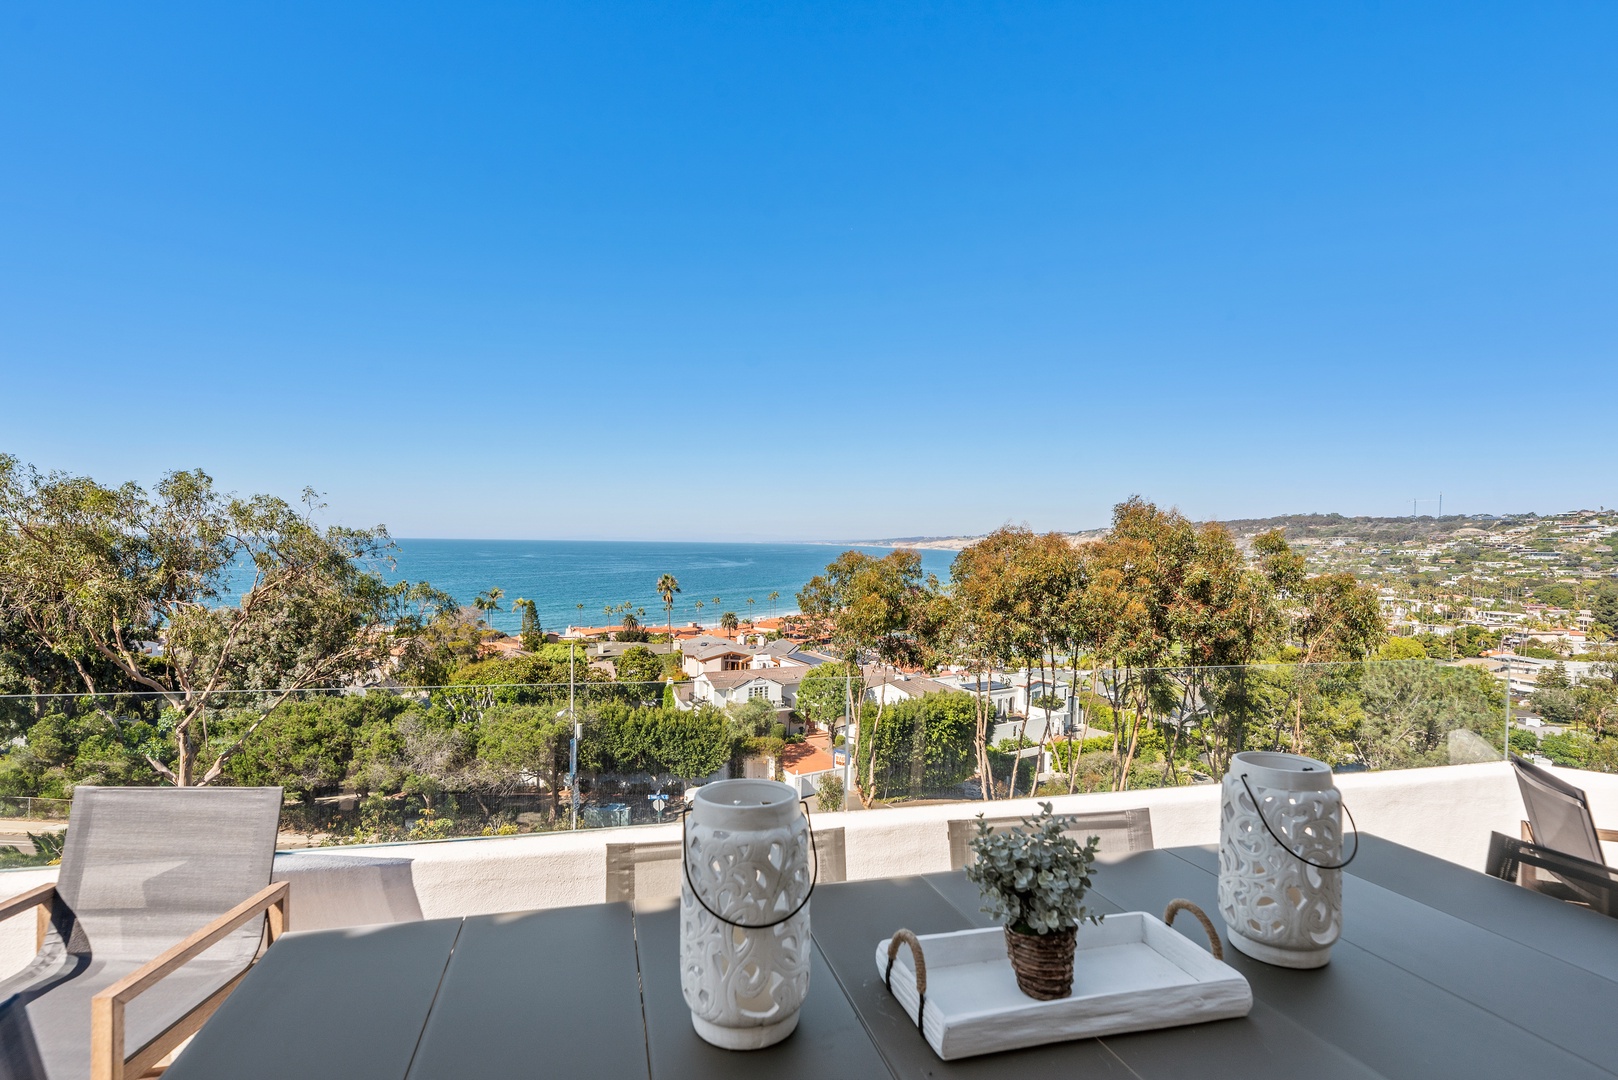 La Jolla Vacation Rentals, Coastal Lookout - Enjoy a glass of wine waiting for the sunset from this view while our chefs prepare you a marvelous meal.